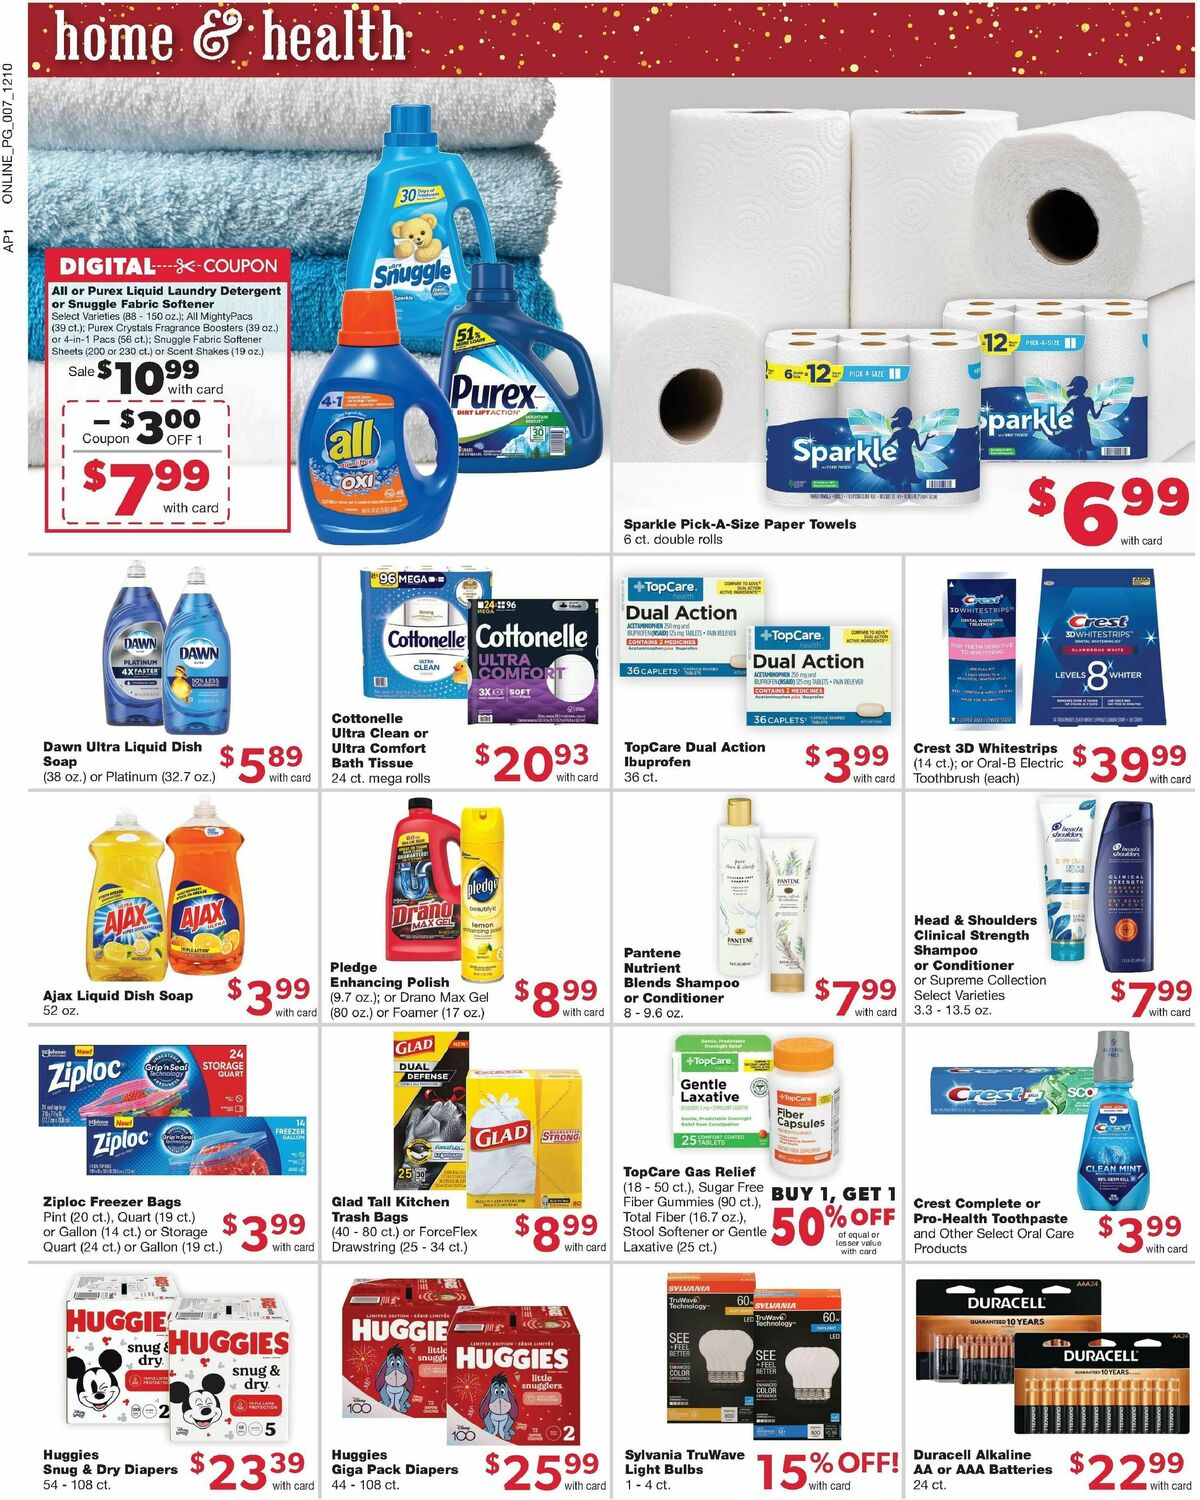 Family Fare Weekly Ad from December 10